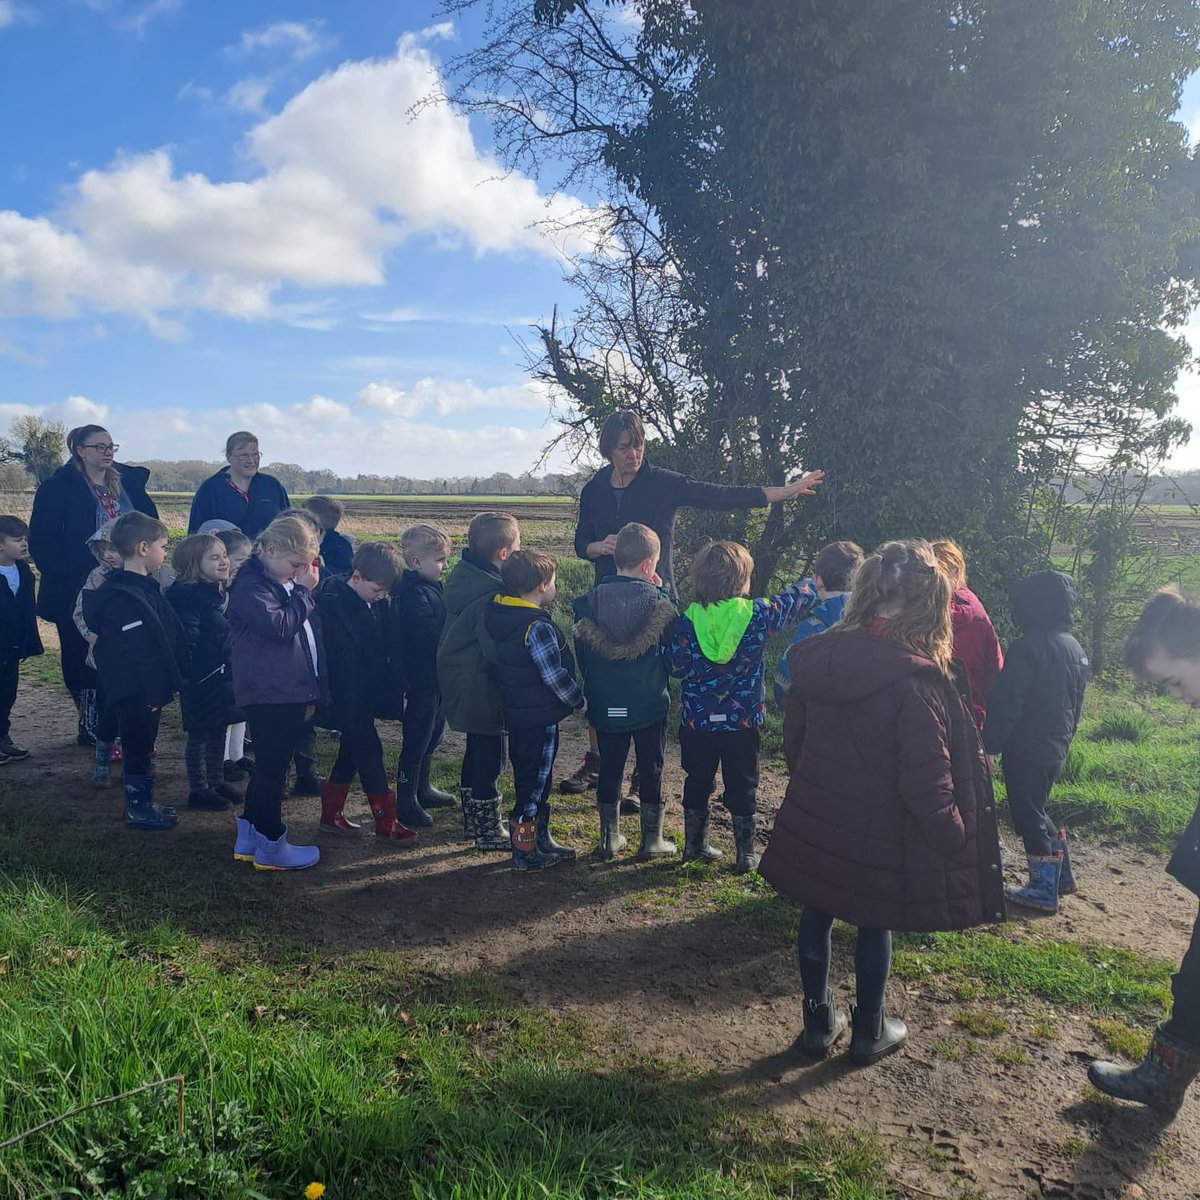 Lovely day with a class of Year 1 pupils at Manor Farm, talking about how good is produced with @JamesDa67866922 & @DeepdaleFarm